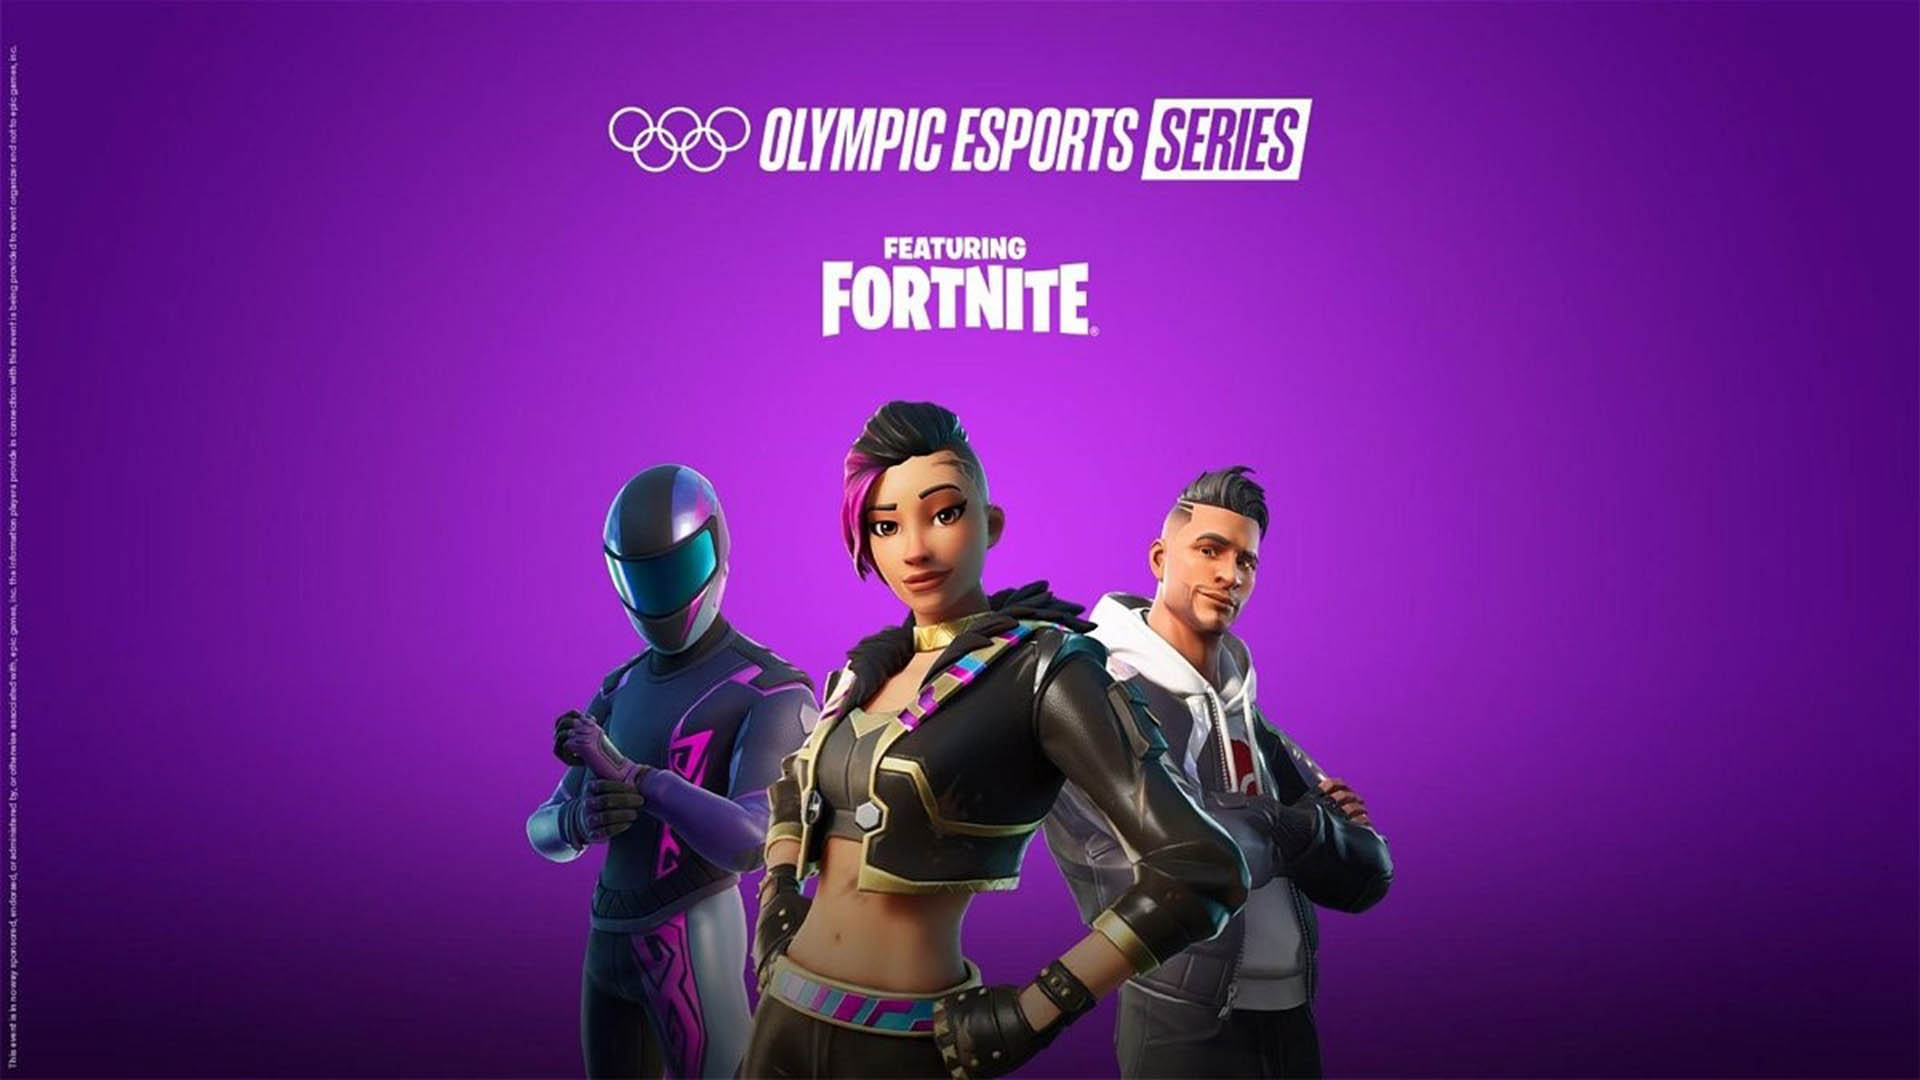 Impact in the esports world: Fortnite is Olympic